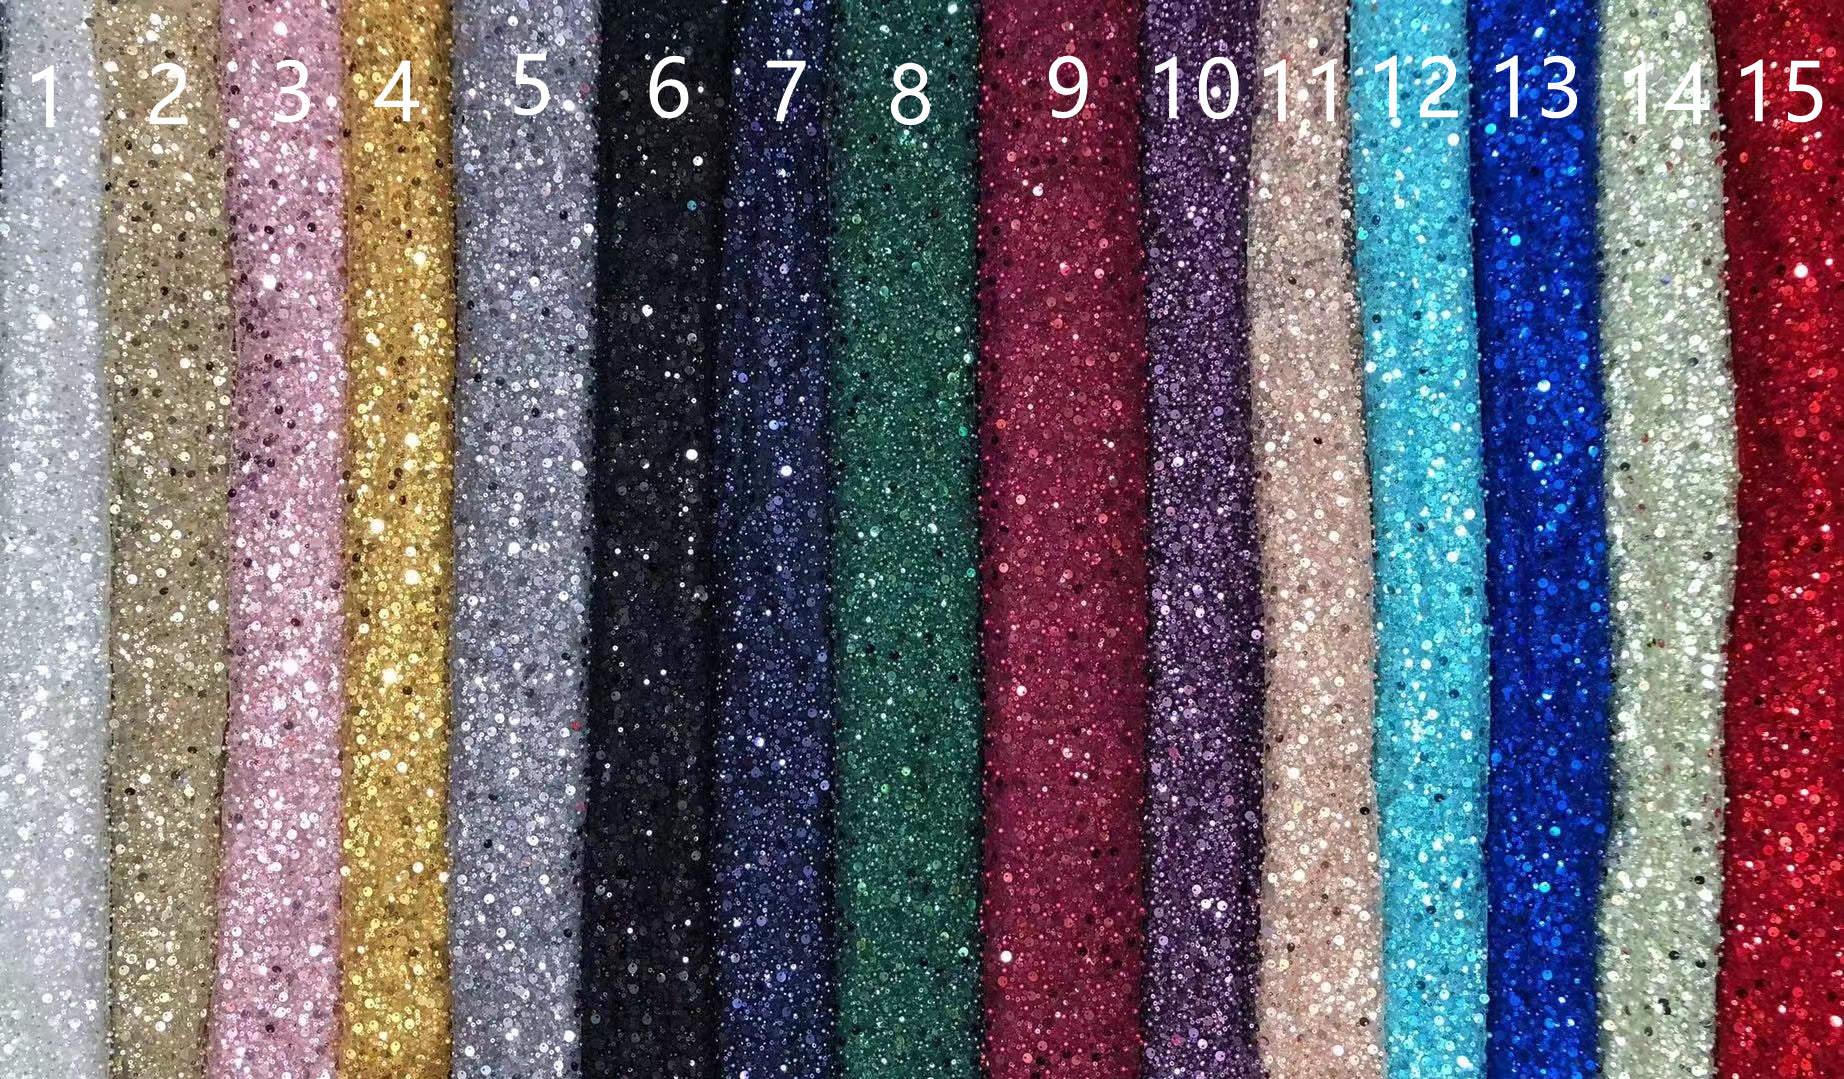 Spaghetti Straps Sequins Long Prom Dresses, Newest 2023 Evening Party Dresses, Mermaid Prom Dresses